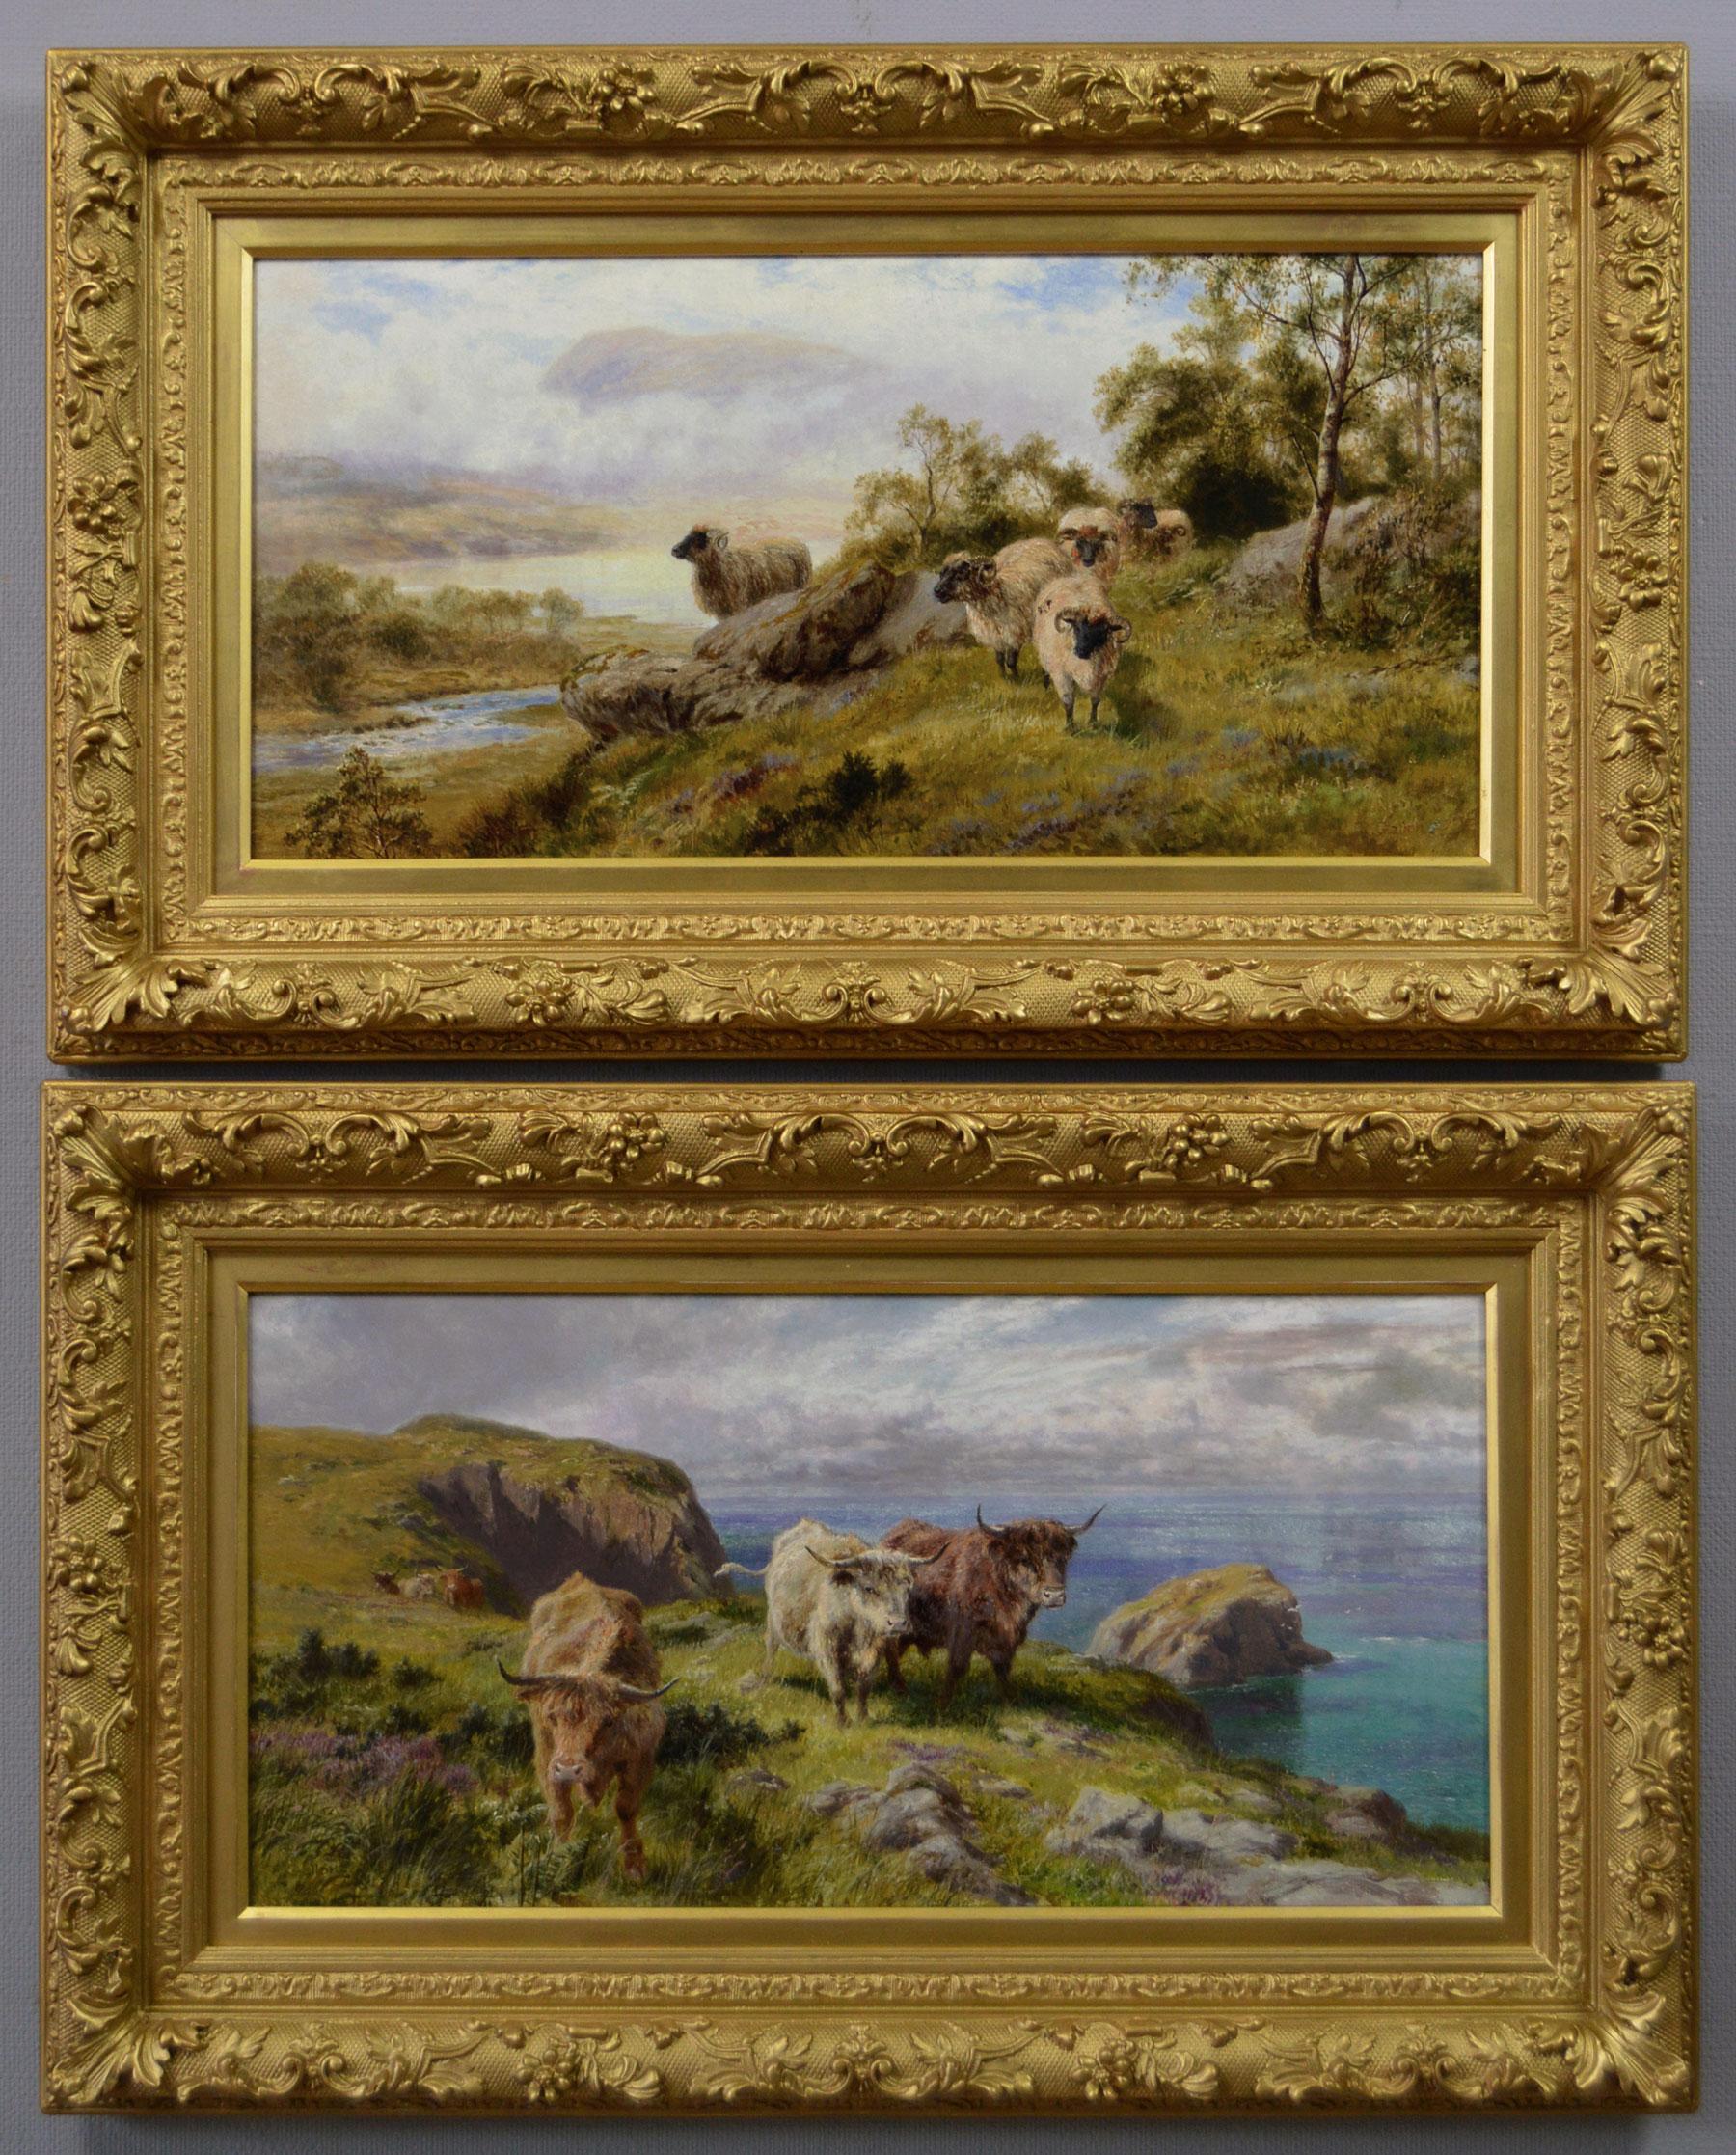 Robert Gallon Landscape Painting - 19th Century pair of Scottish landscape oil paintings with sheep & cattle